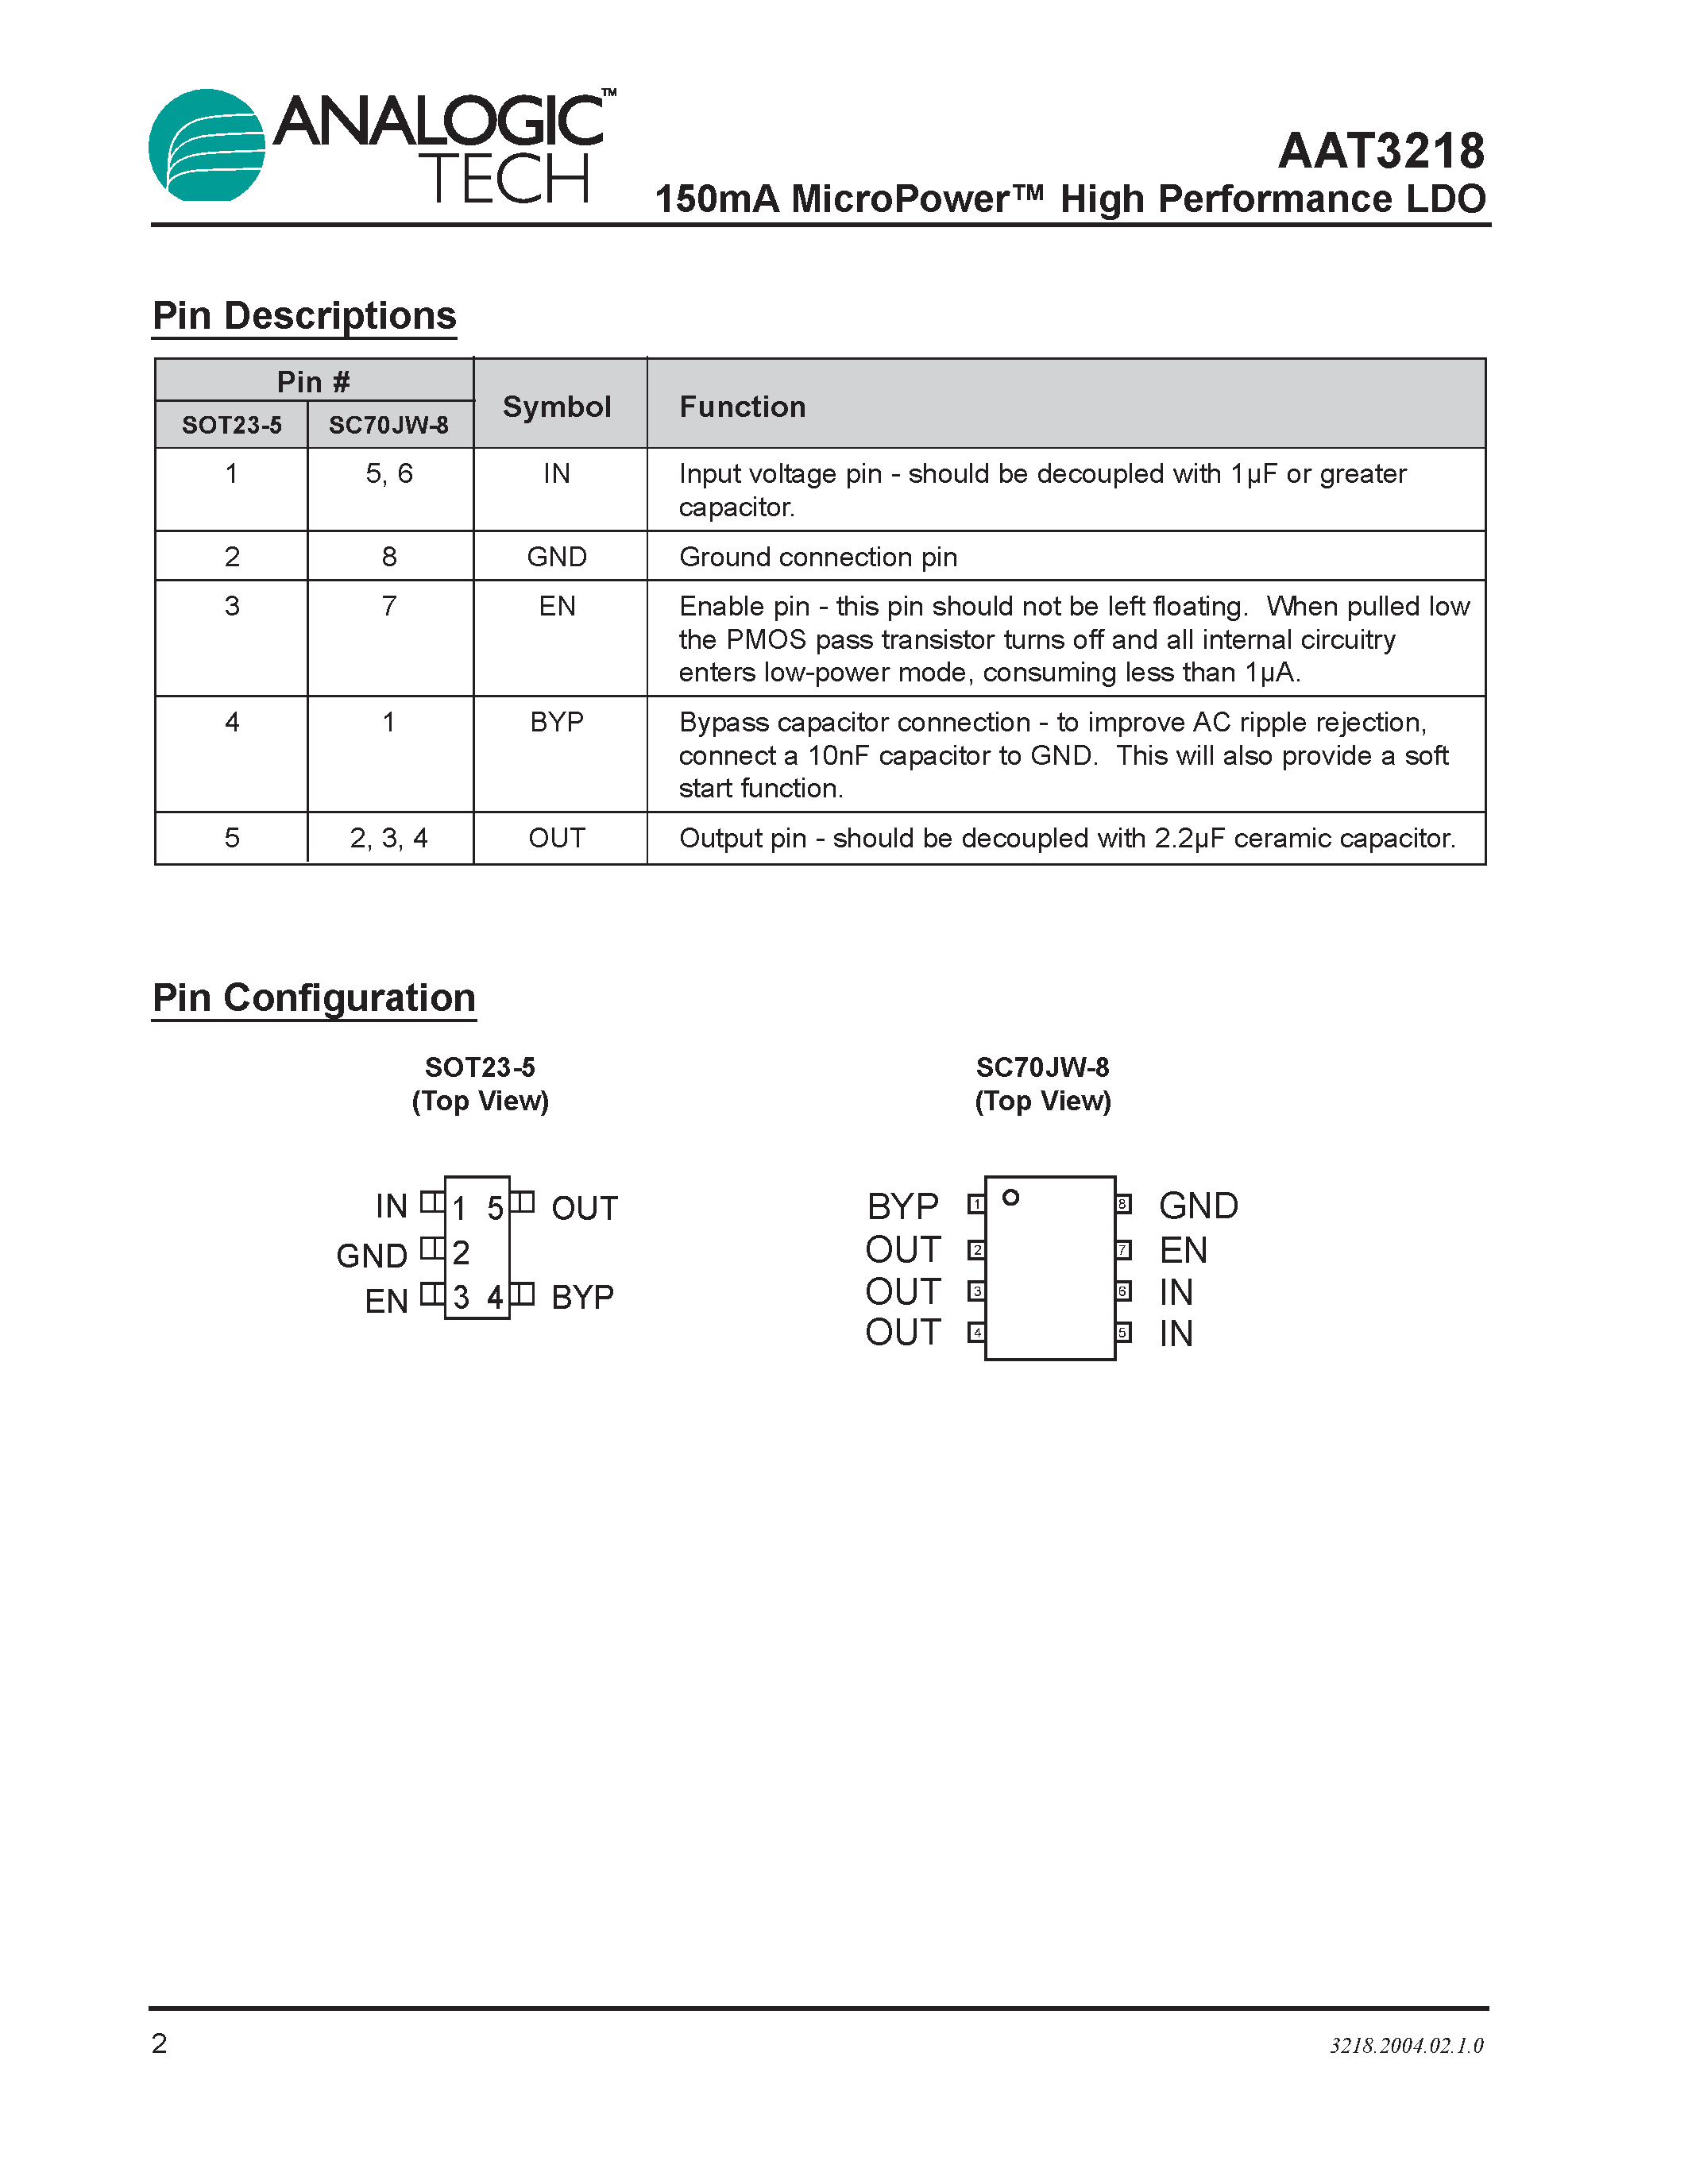 Datasheet AAT3218IGV-1.9-T1 - 150mA MicroPower High Performance LDO page 2